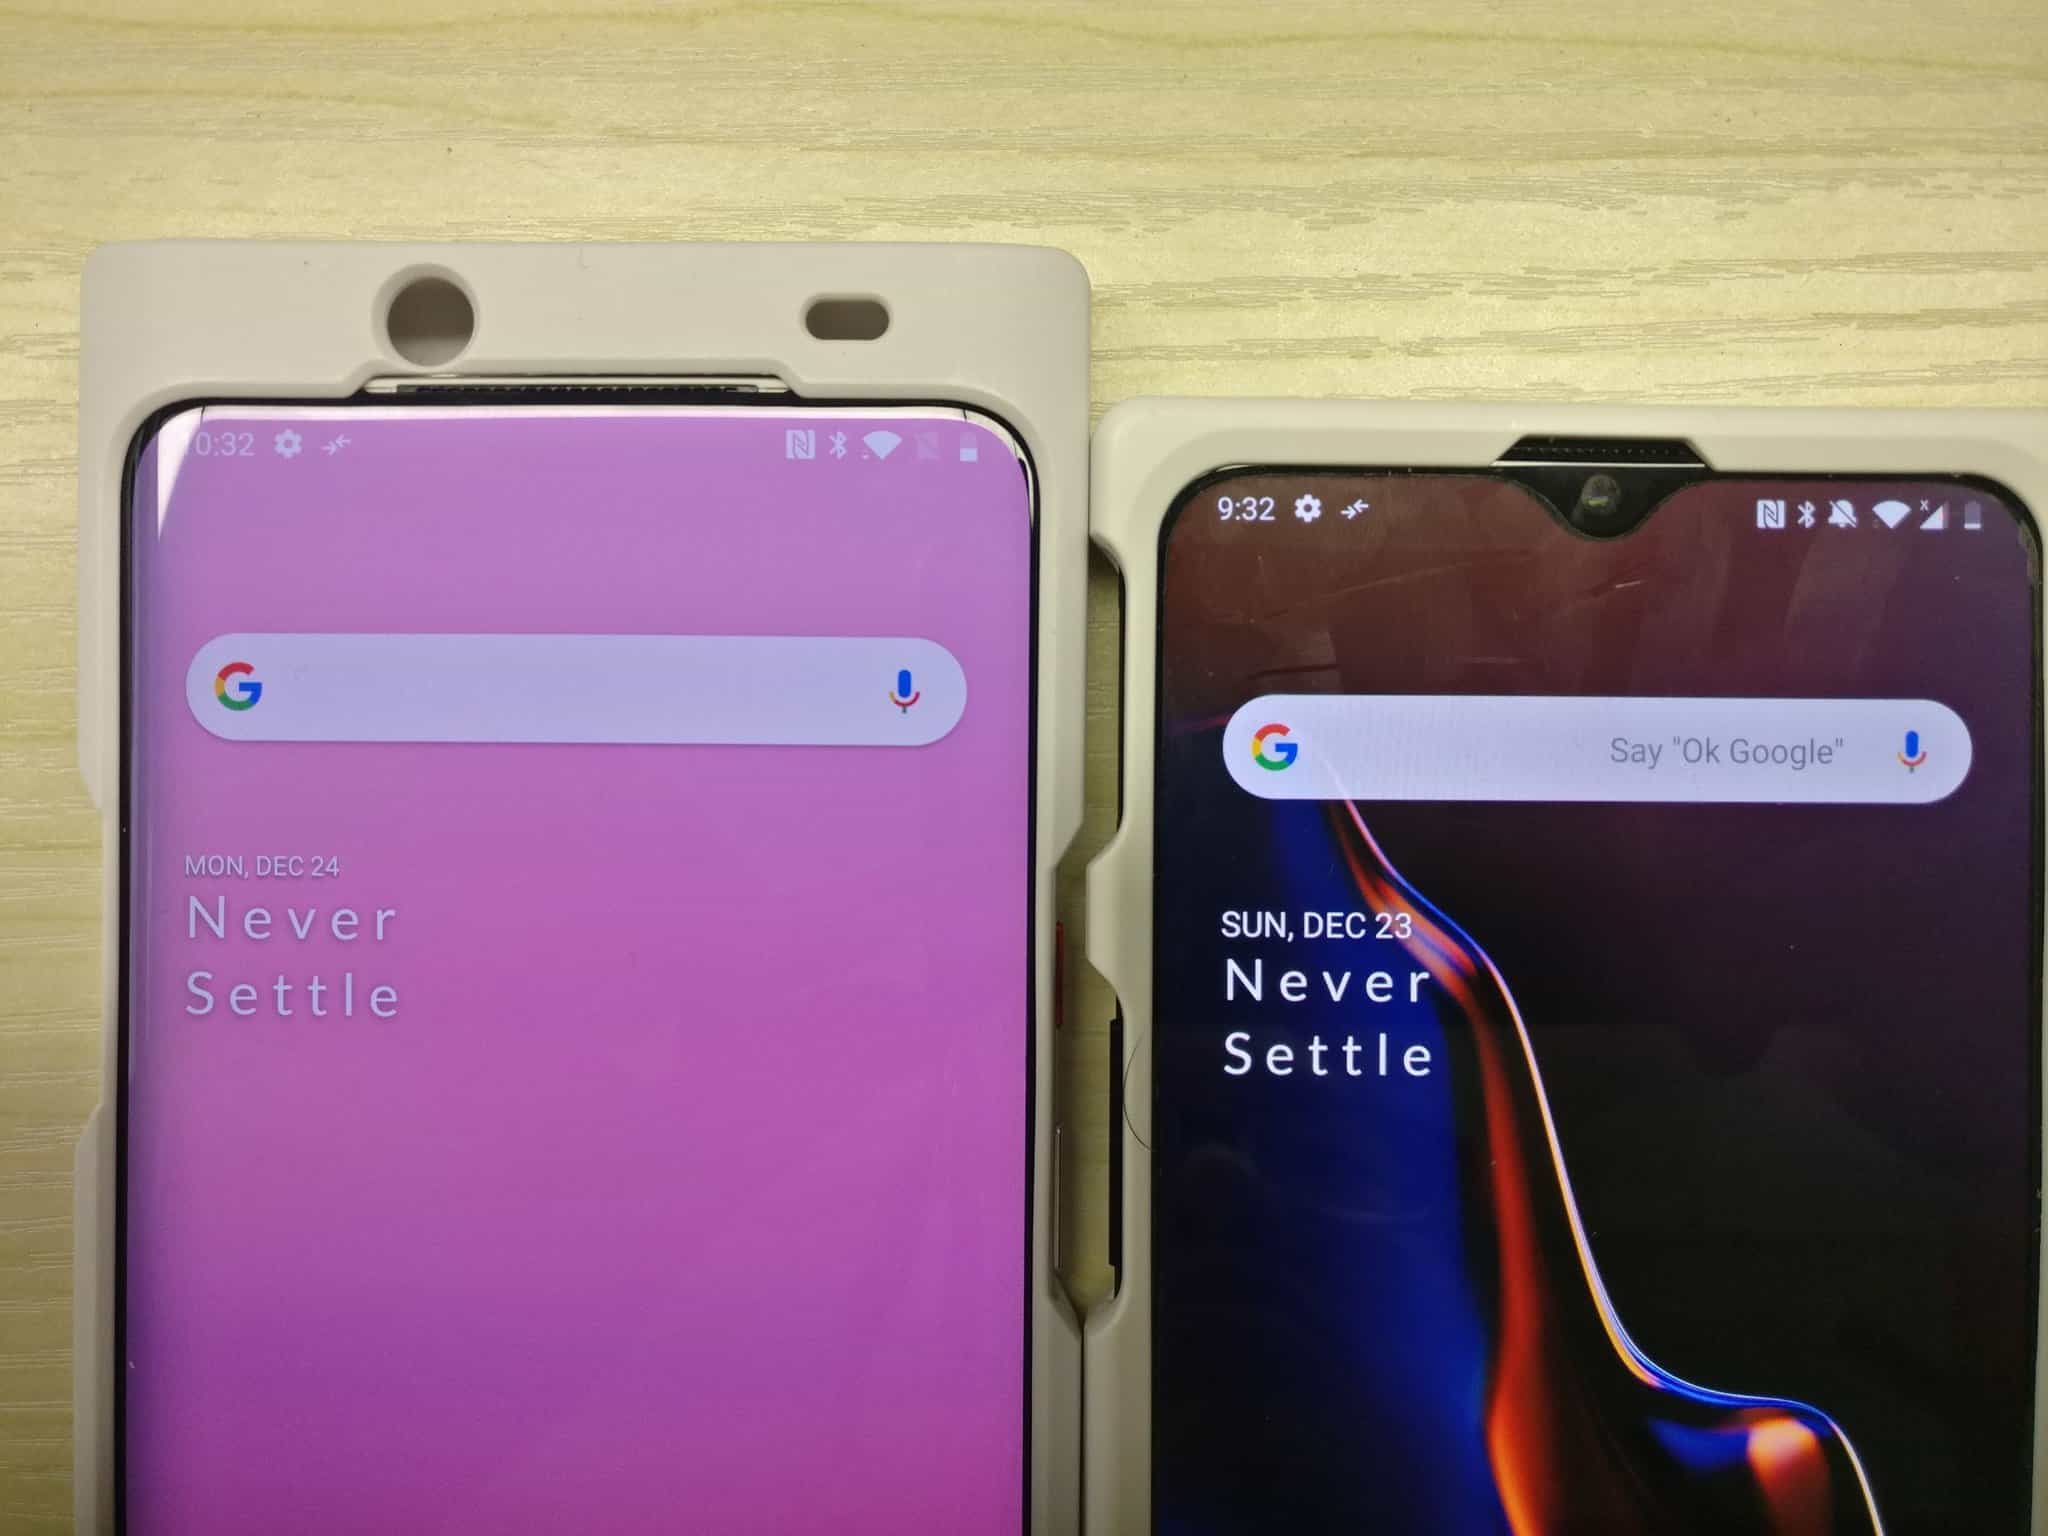 Oneplus 7 live picture surfaces online, could be a slider smartphone